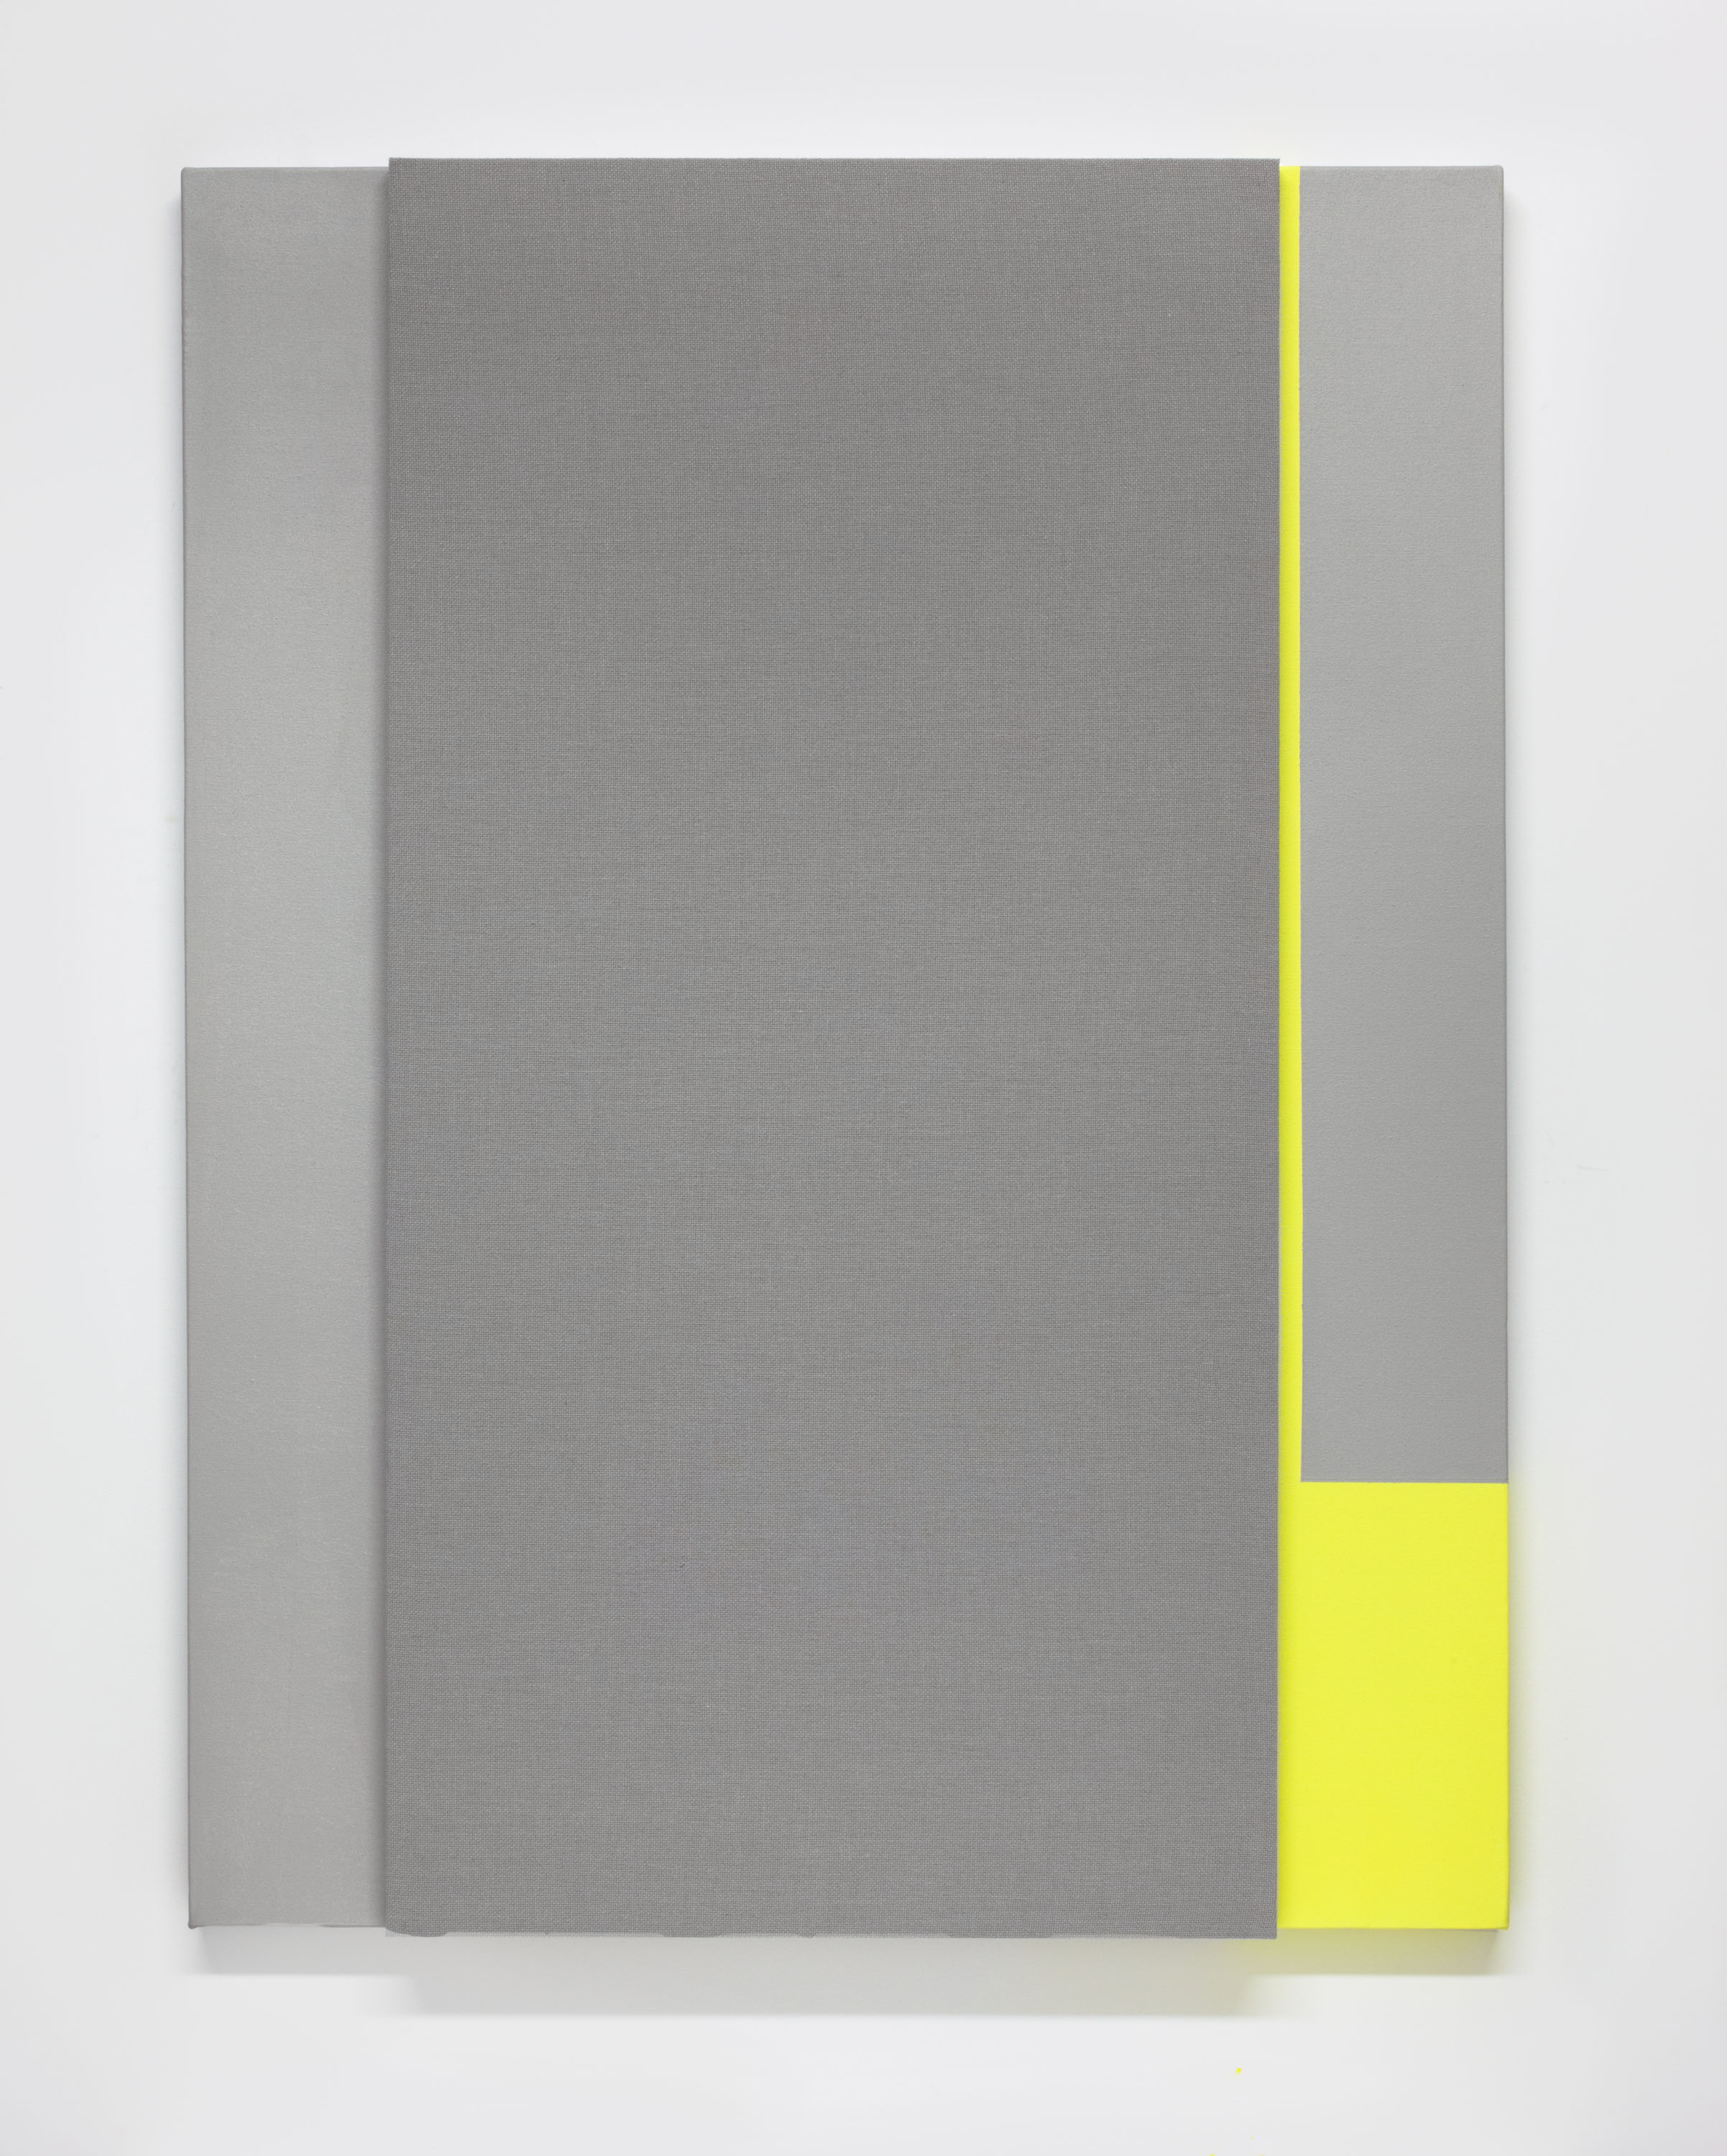  Soft Gray Tone with Reverberation #2--&nbsp;Acoustic absorber panel and acrylic paint on canvas, 36 x 48 inches each, 2013. 